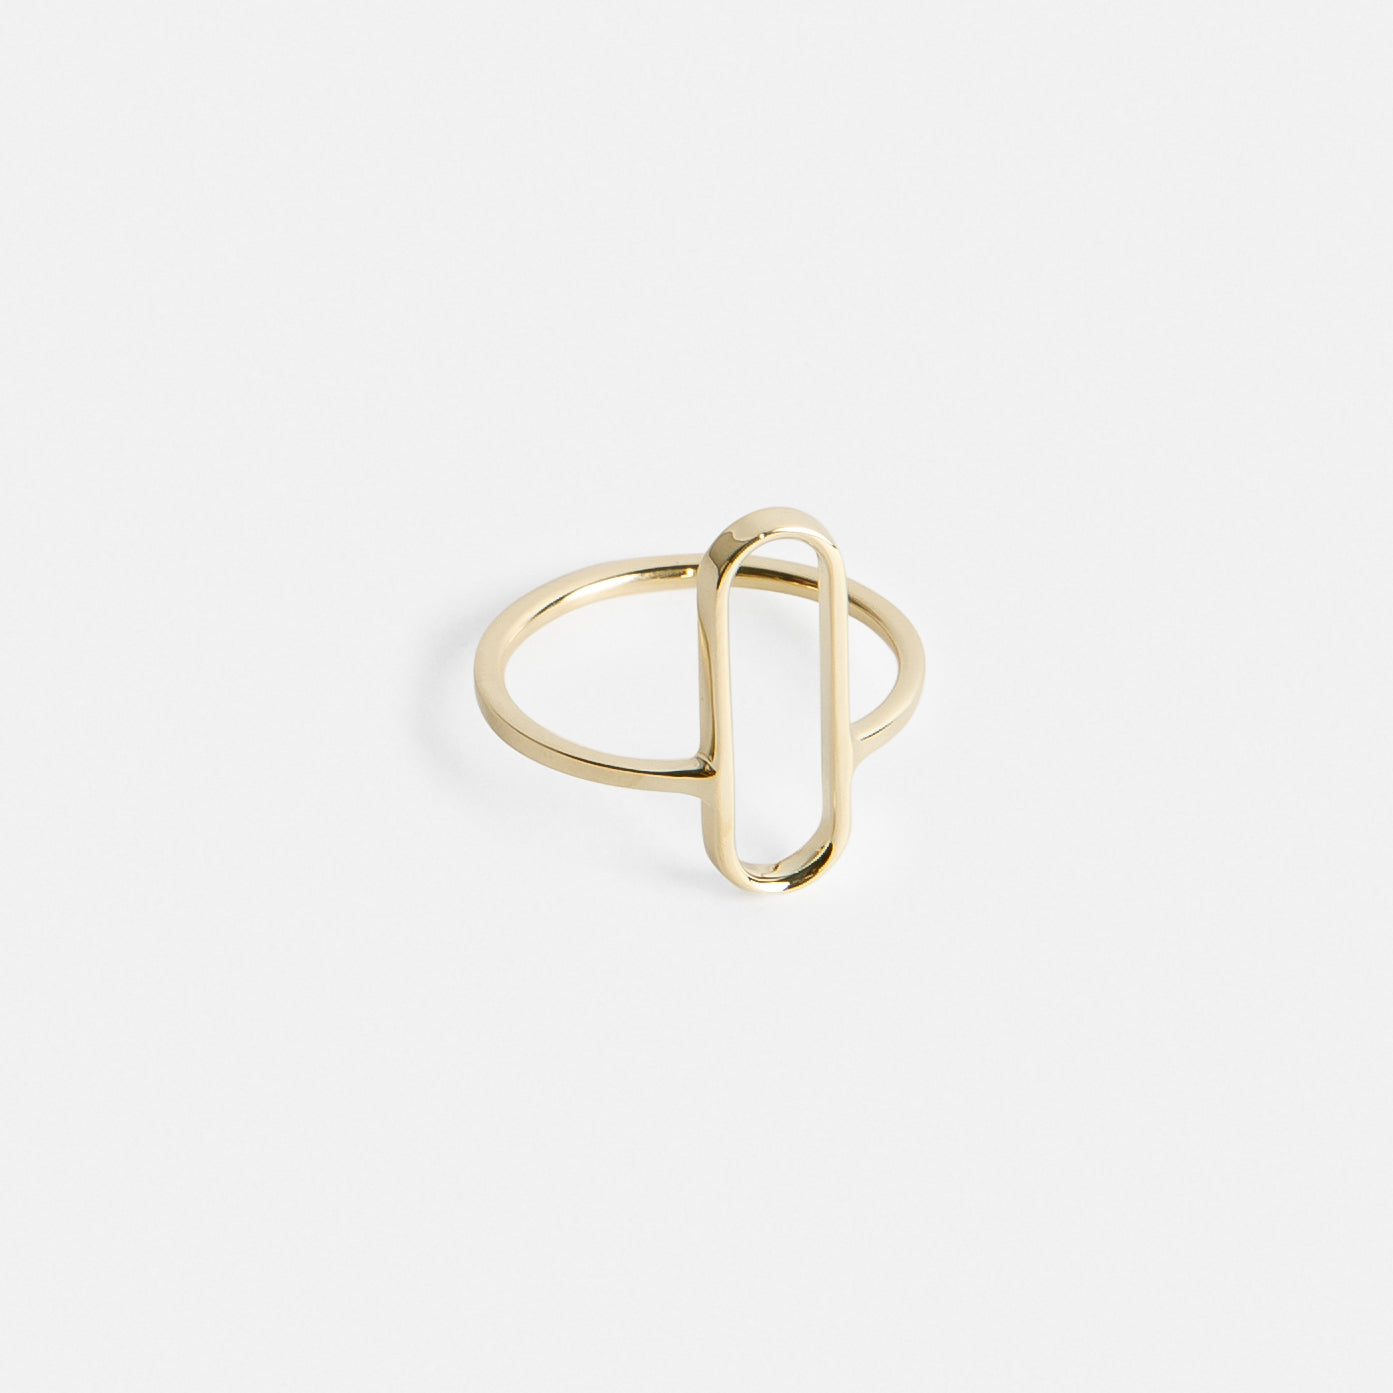 Rengi Unconventional Ring in 14k Gold by SHW Fine Jewelry Stacking Large Kaya Ring in 14k Gold set with Ruby by SHW Fine Jewelry in NYC